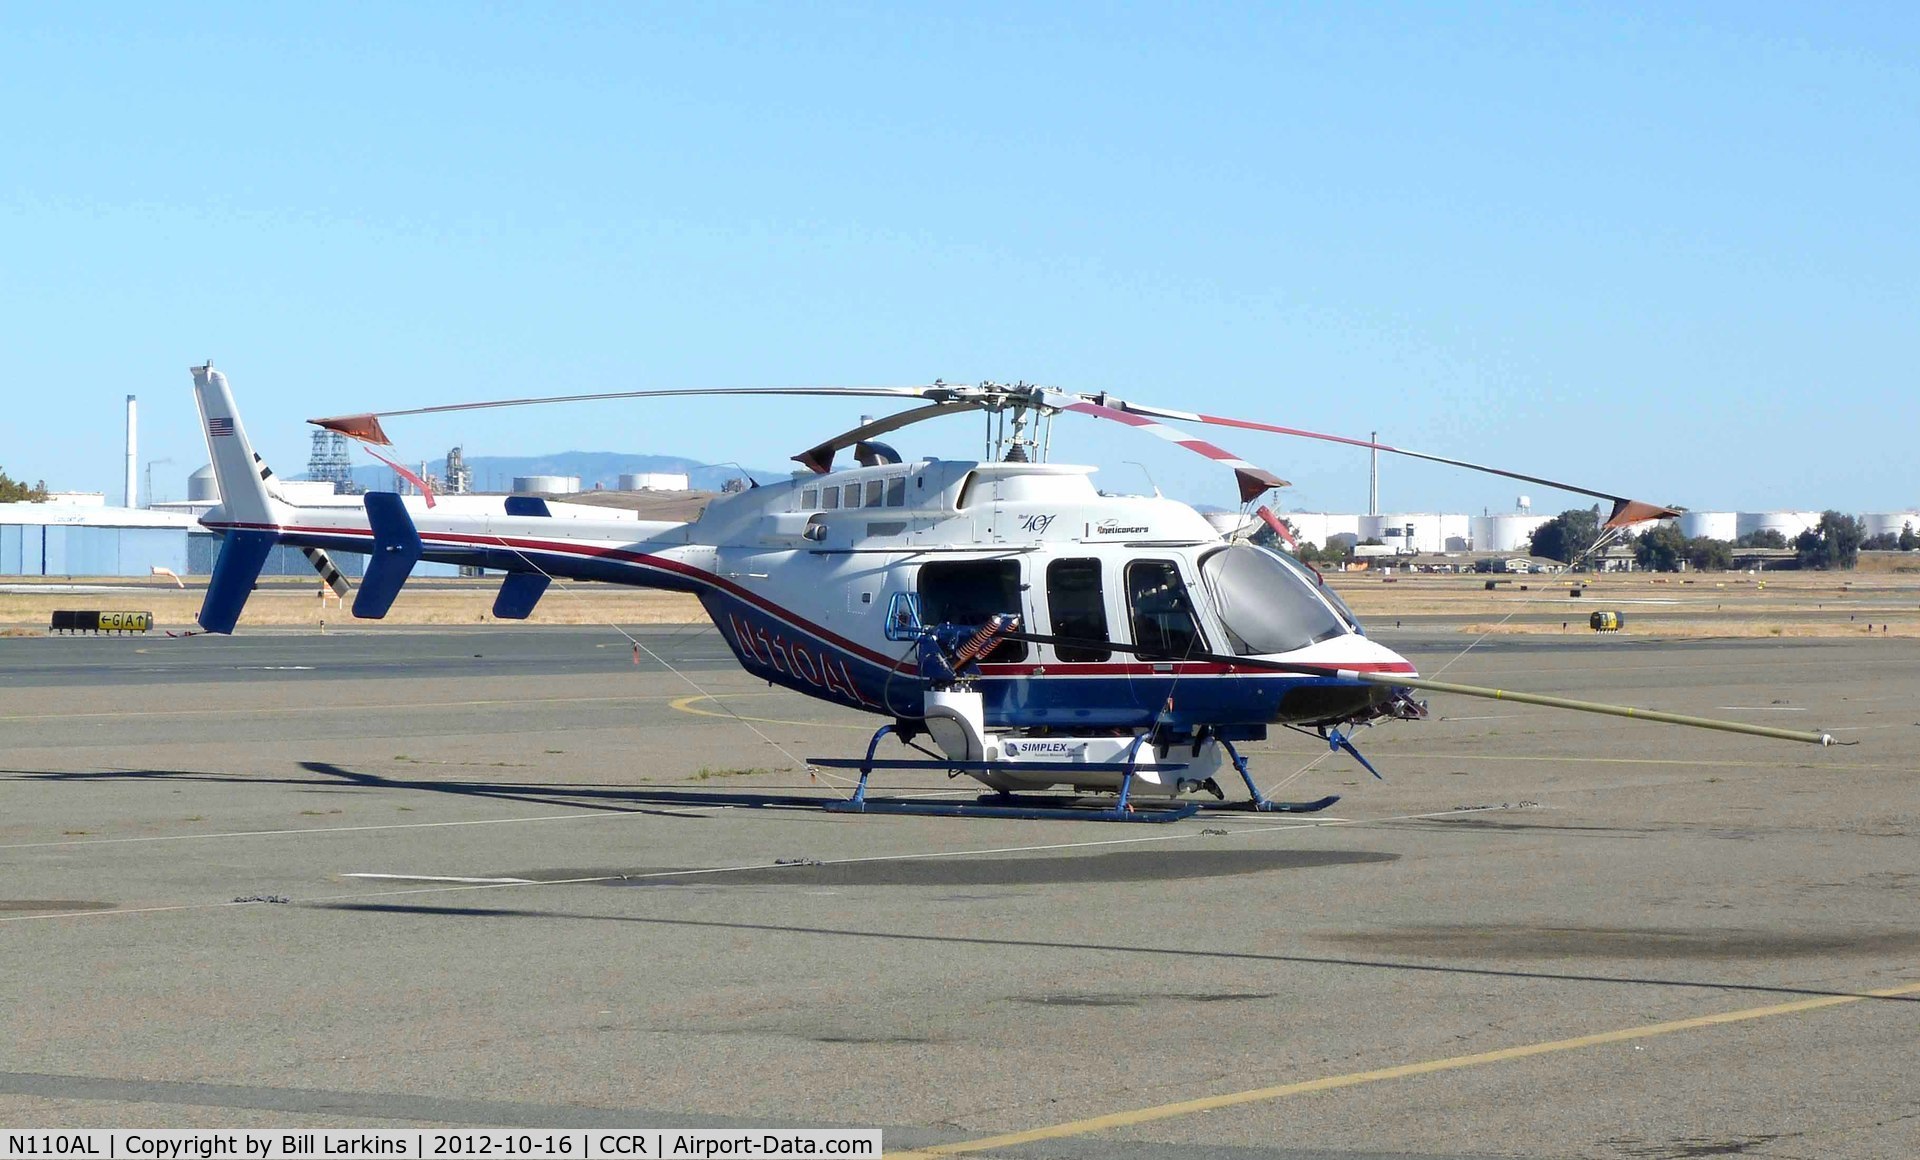 N110AL, 2001 Bell 407 C/N 53469, The washing system is still in use and was used in October 2012 by the Pacific Gas & Electric Company on high voltage power lines in California.